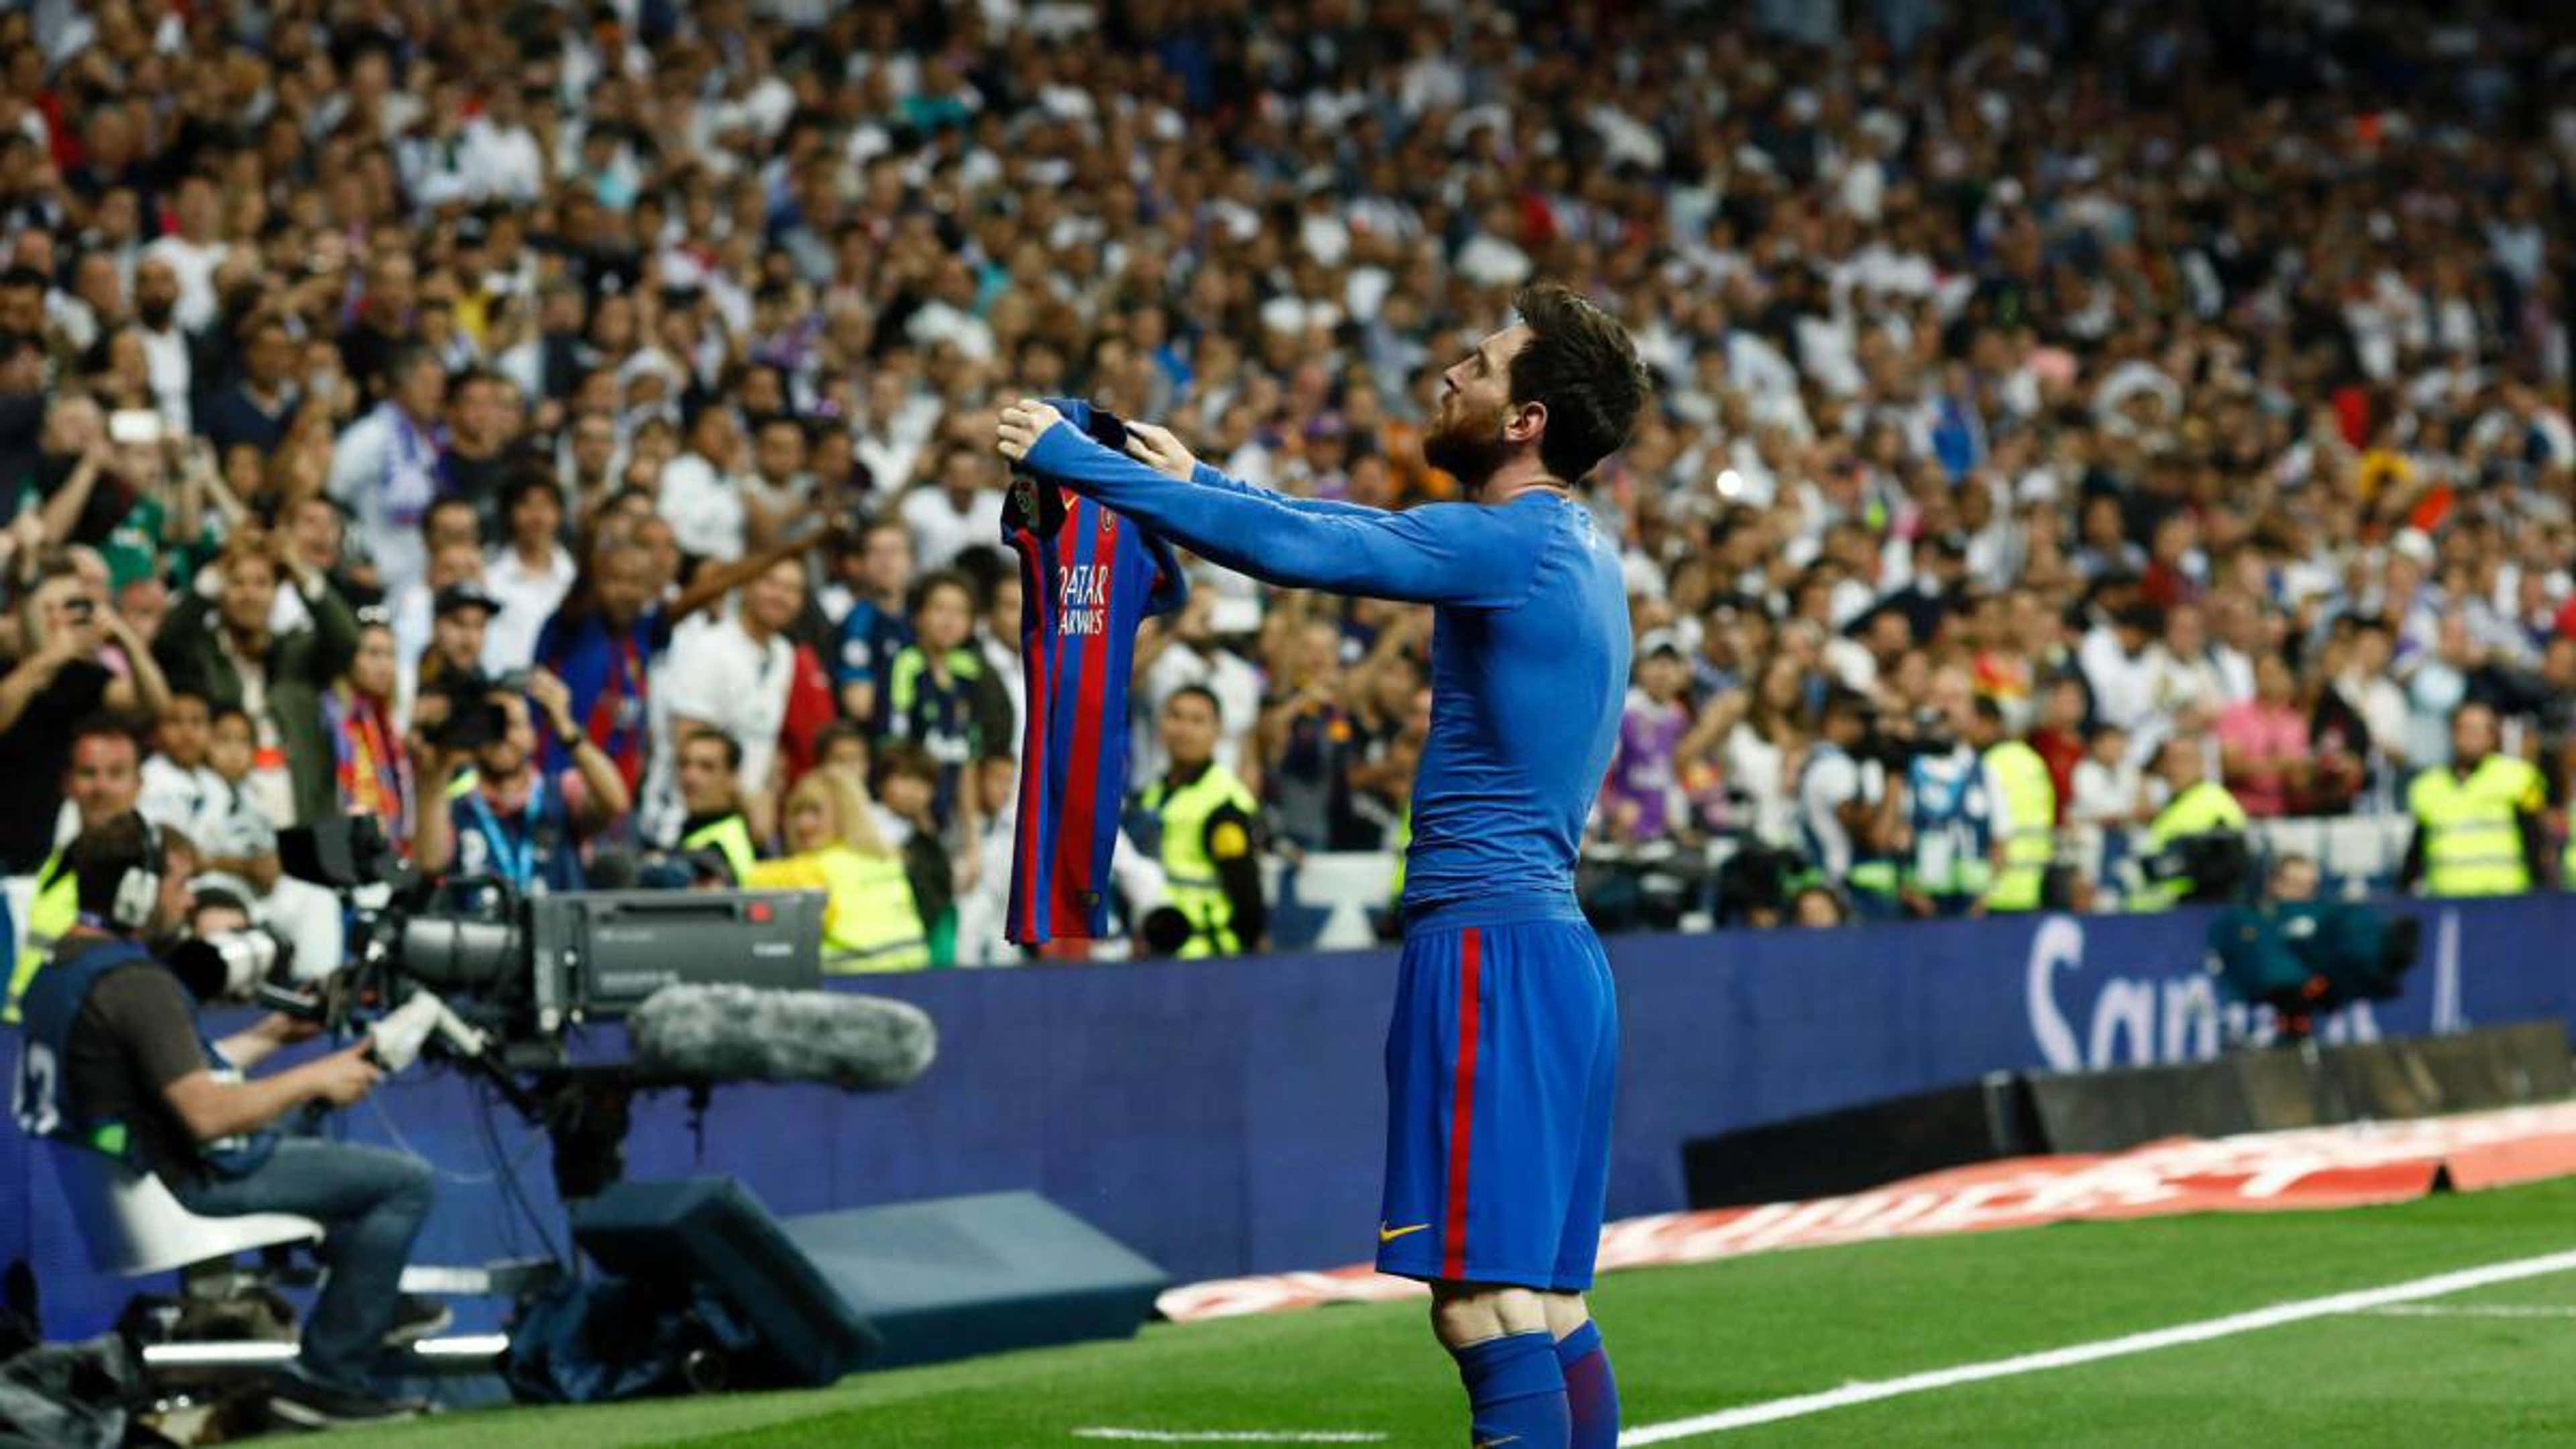 WATCH: Cristiano Ronaldo silences Barcelona fans at Camp Nou with his  iconic 'Calma' celebration in 2012